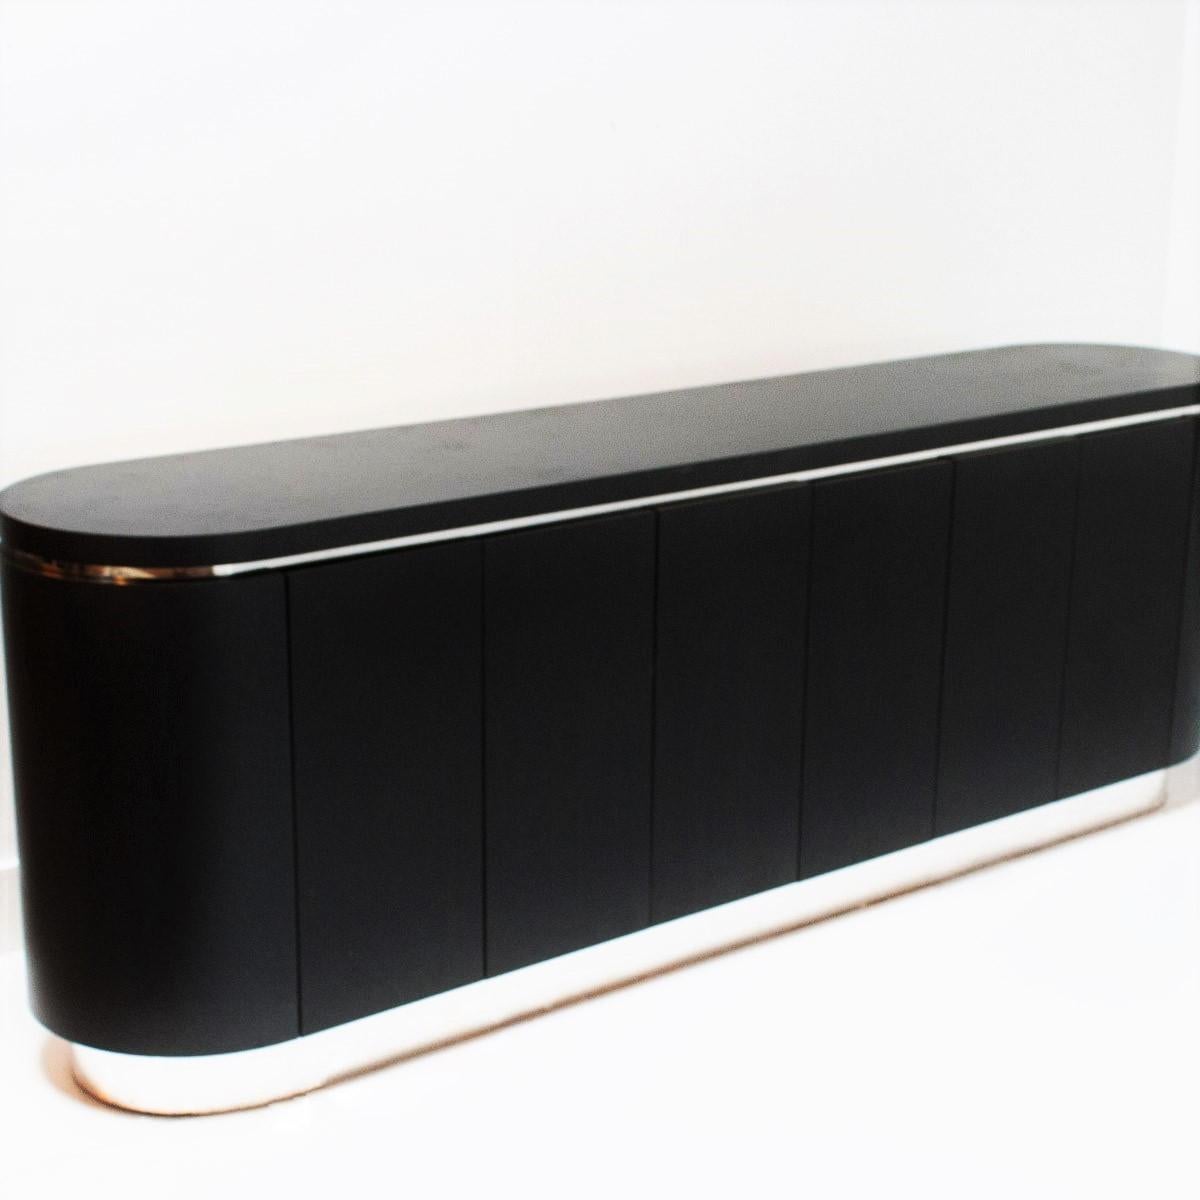 Exceptional proportions, black lacquered credenza with rounded ends. Consist of three double doors that hide internal shelves. Chrome strip inset between the top and cabinet, resting on a chrome plinth base.